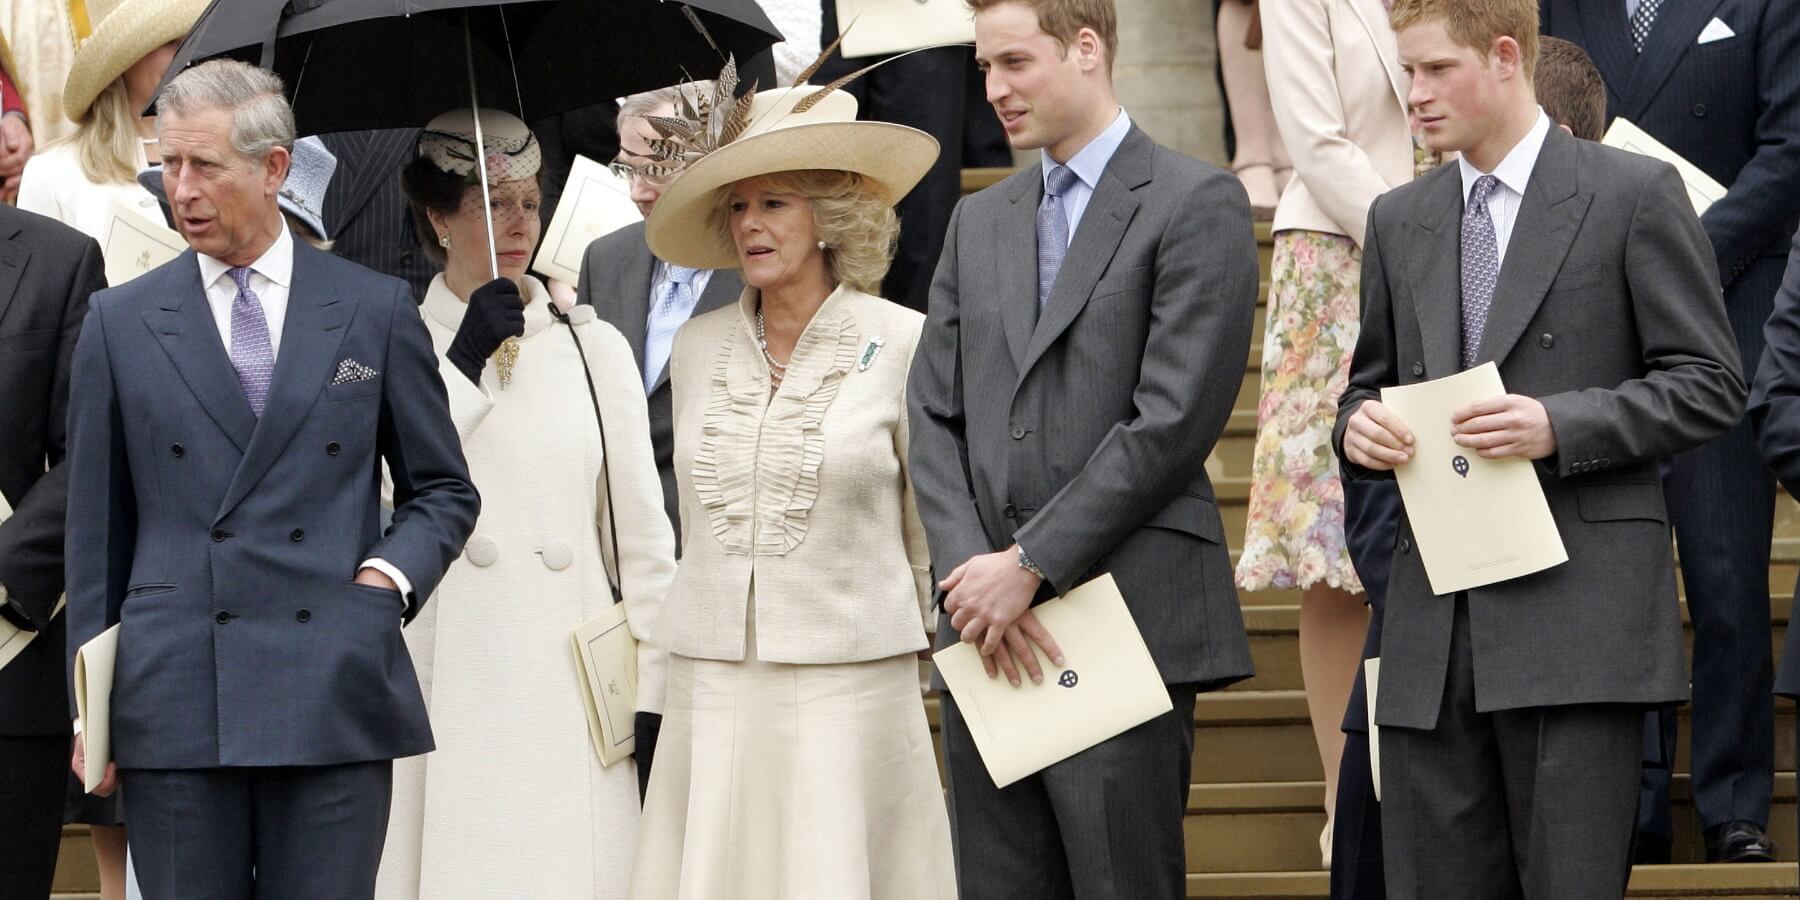 King Charles, Princess Anne, Camilla Parker Bowles, Prince William and Prince Harry